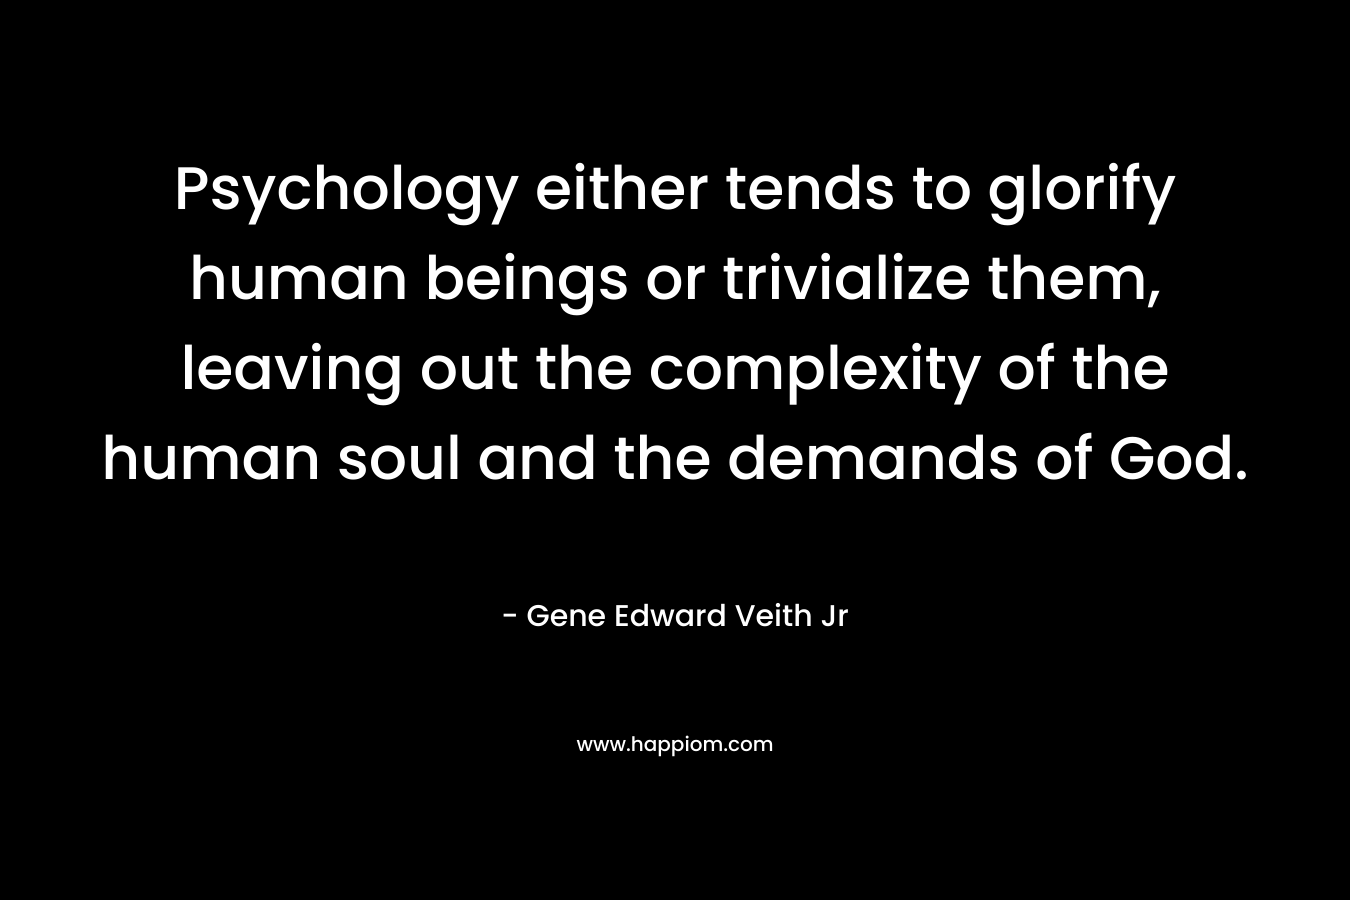 Psychology either tends to glorify human beings or trivialize them, leaving out the complexity of the human soul and the demands of God. – Gene Edward Veith Jr